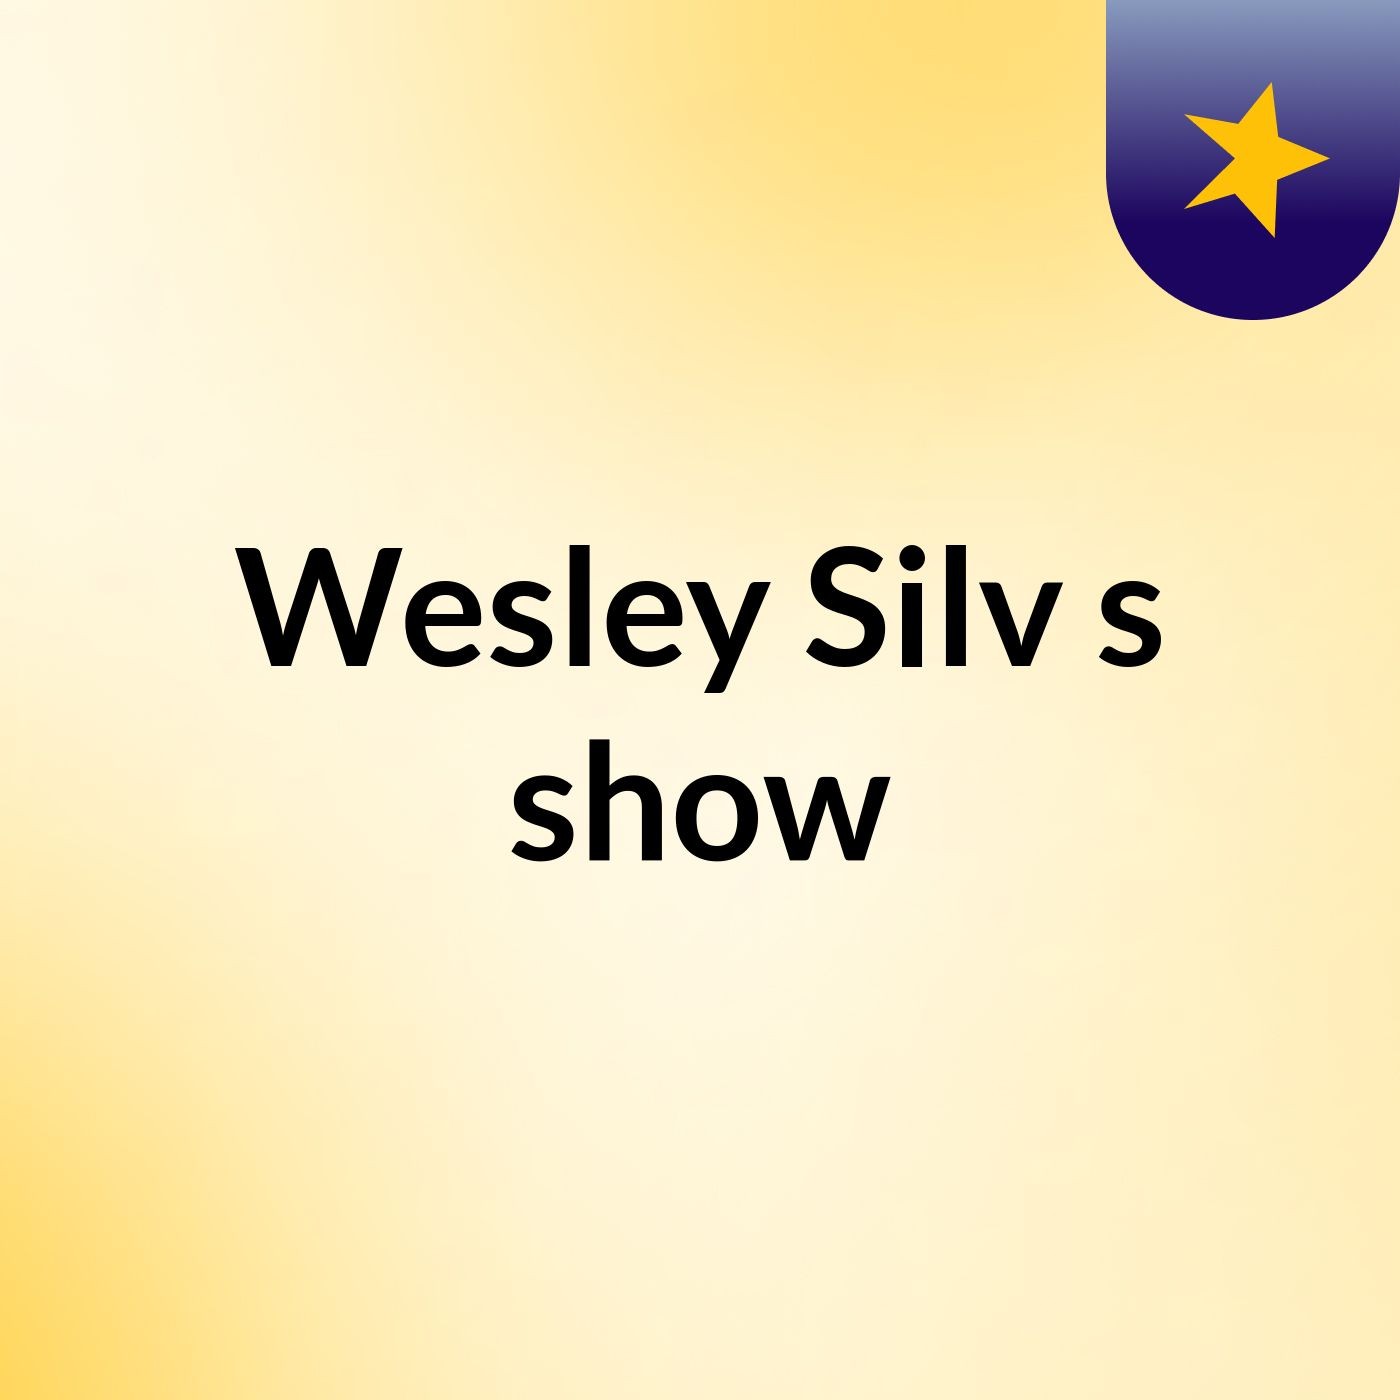 Wesley Silv's show